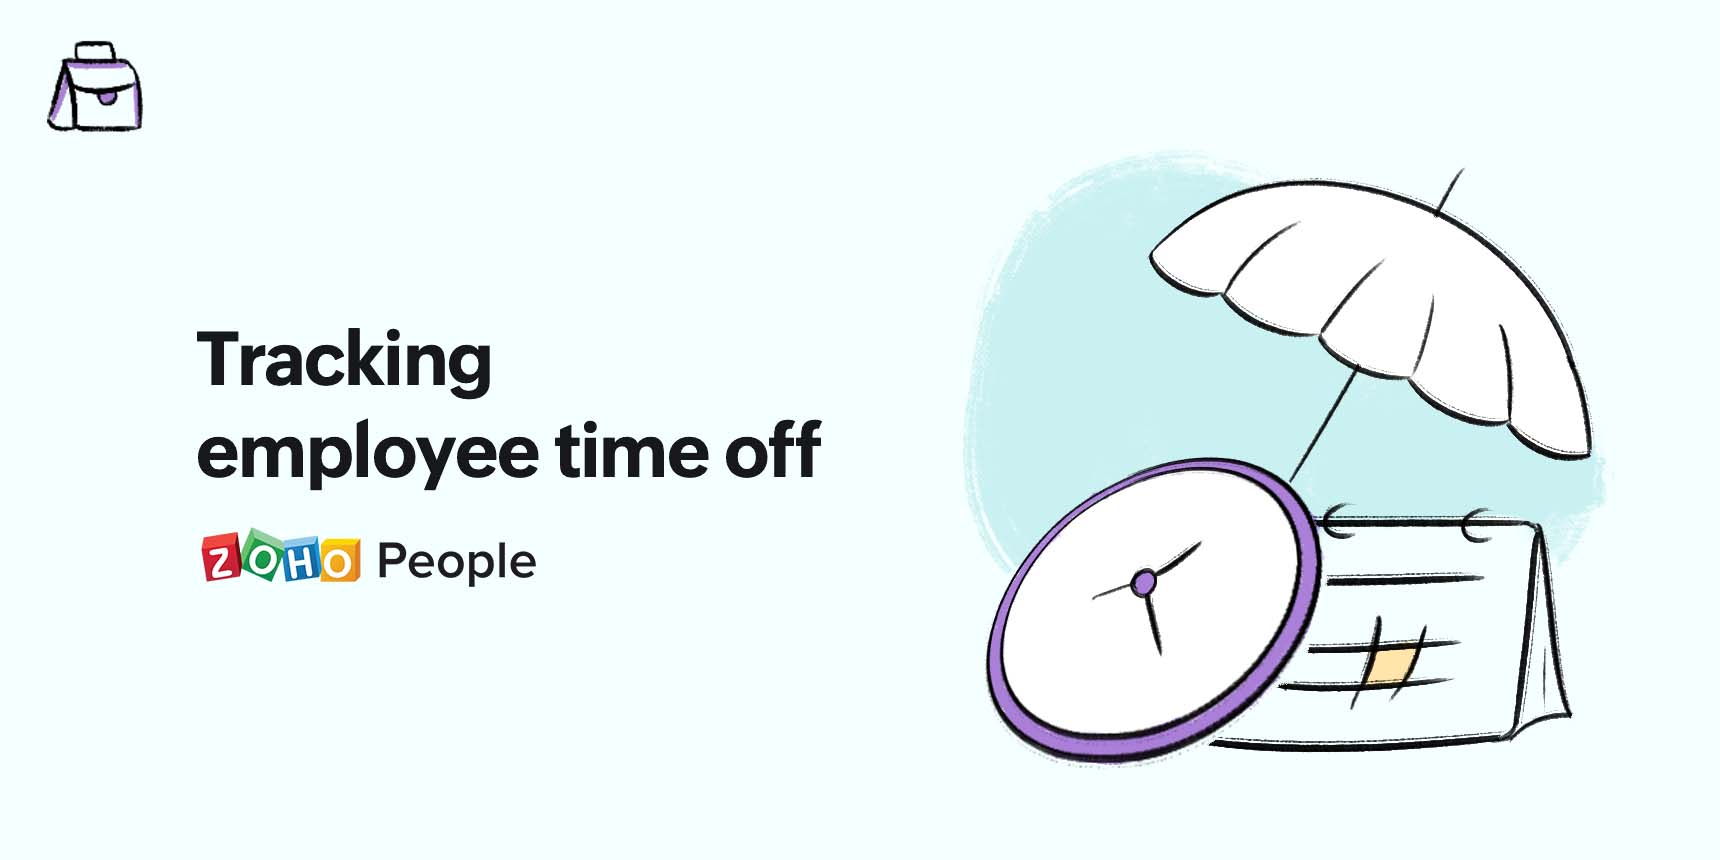 Here’s how organizations can track employee time off accurately